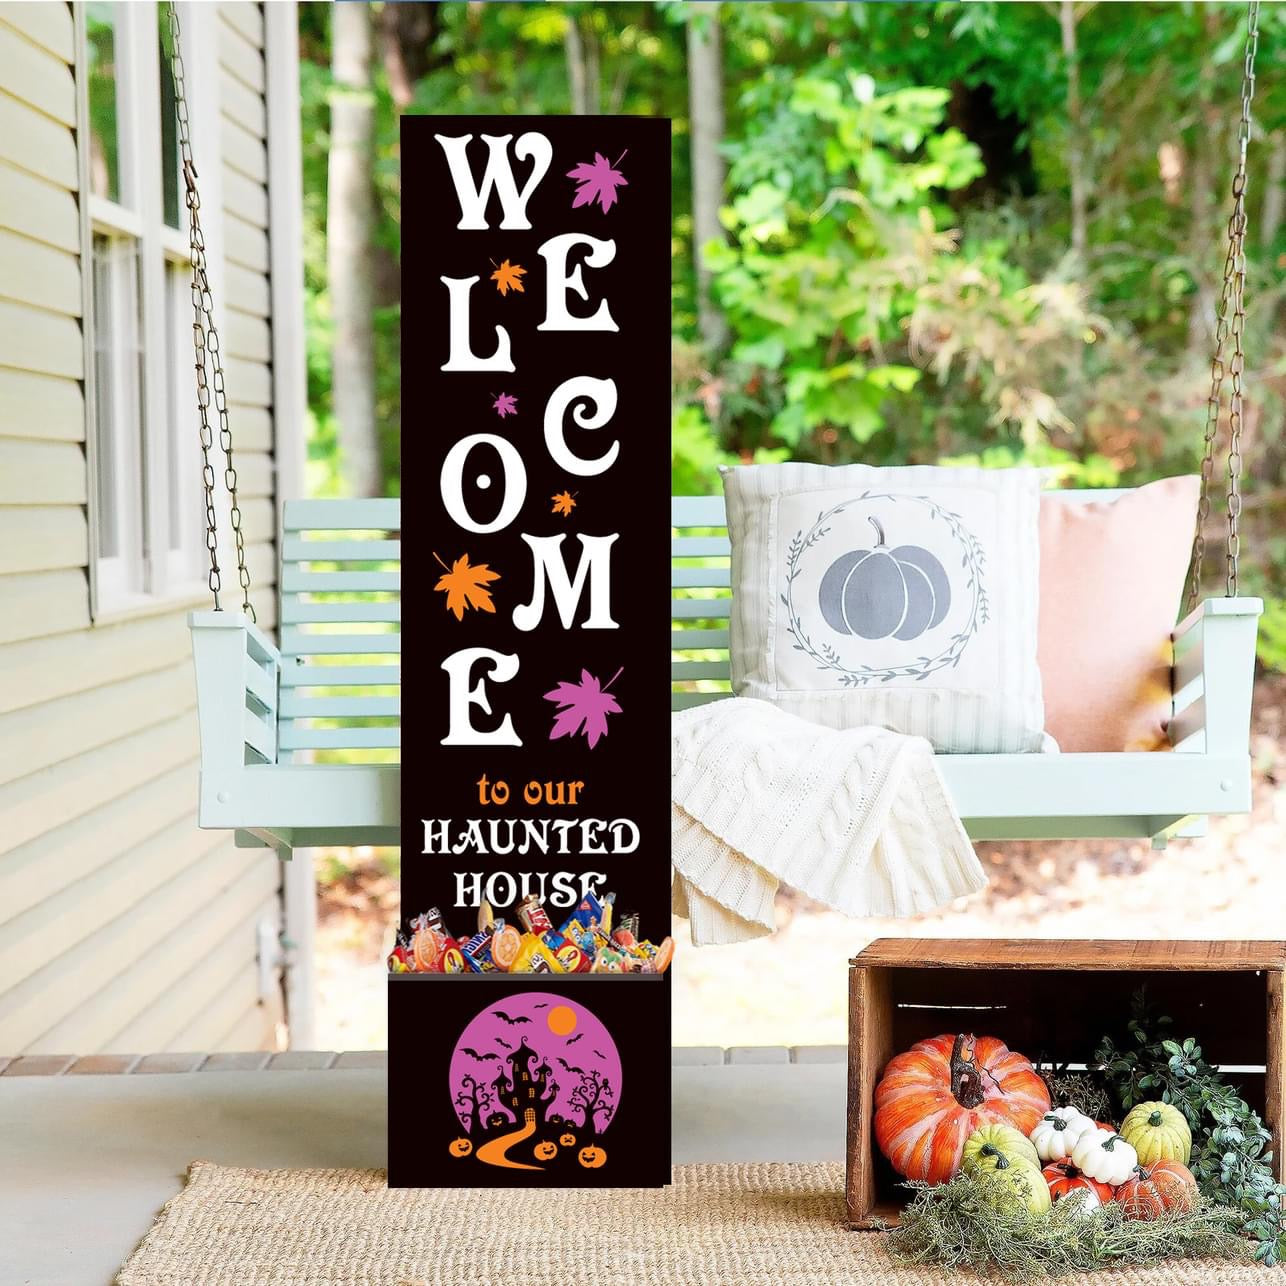 HALLOWEEN CANDY PLANTERS